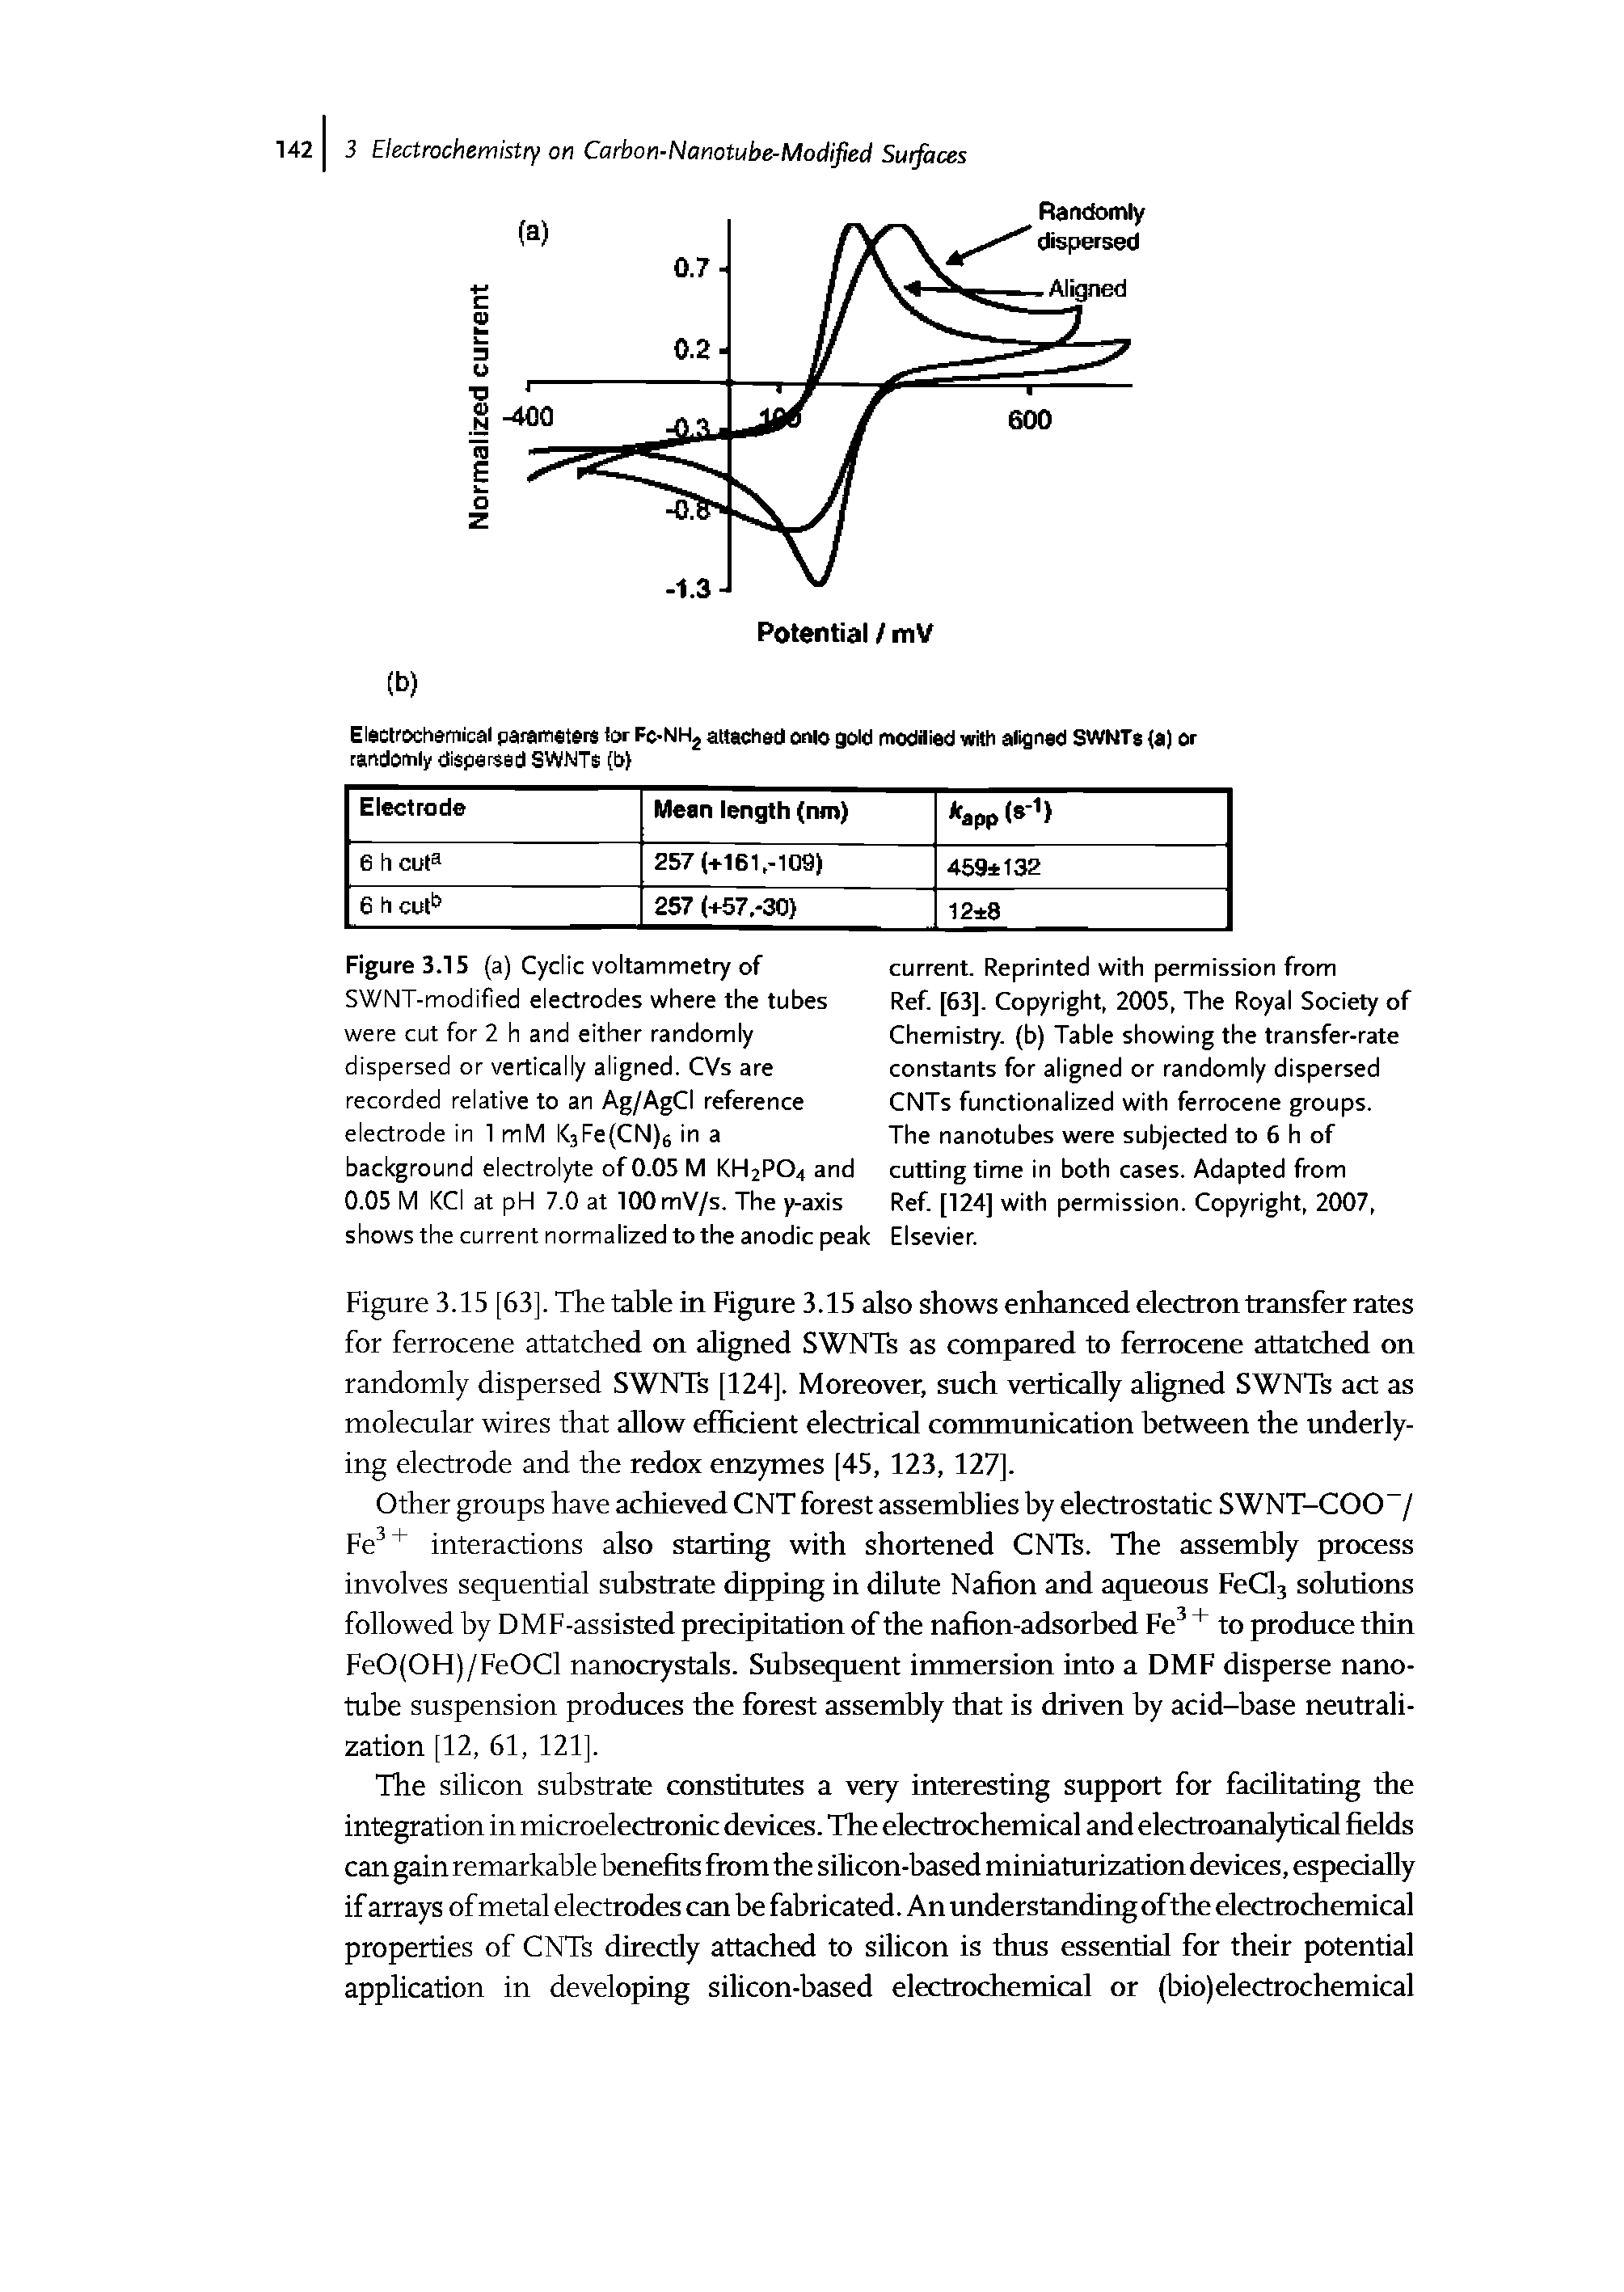 Figure 3.15 [63]. The table in Figure 3.15 also shows enhanced electron transfer rates for ferrocene attatched on aligned SWNTs as compared to ferrocene attatched on randomly dispersed SWNTs [124]. Moreover, such vertically aligned SWNTs act as molecular wires that allow efficient electrical communication between the underlying electrode and the redox enzymes [45, 123, 127[.